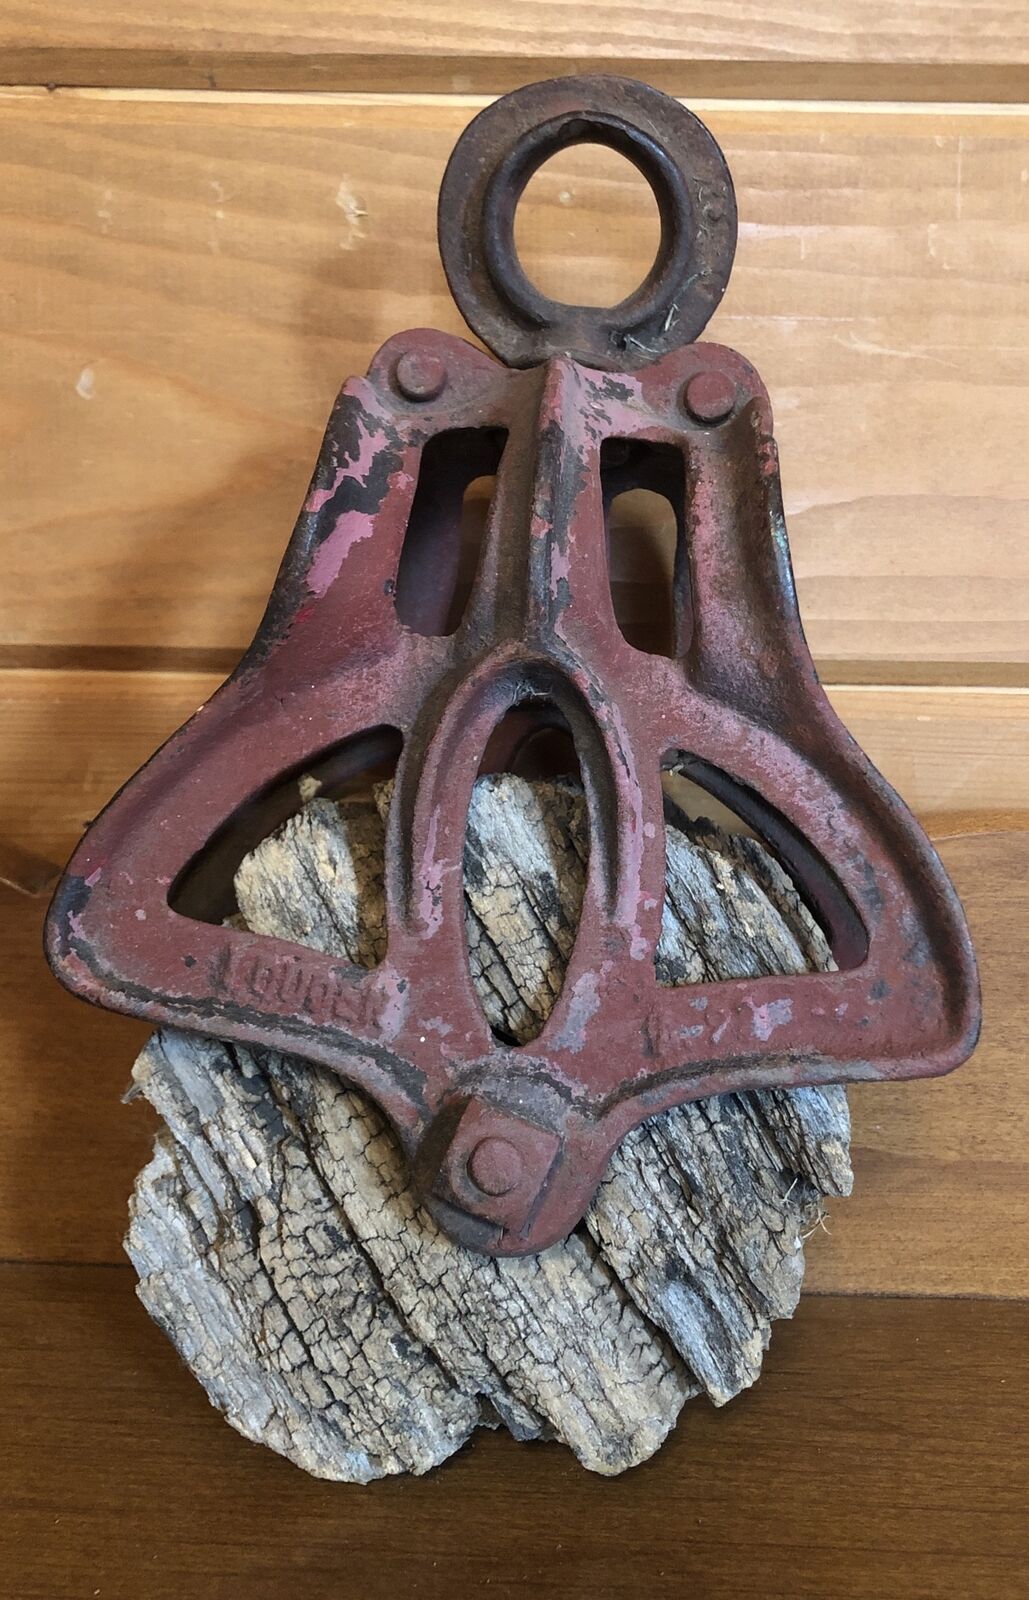 Vintage Louden A23 Barn Pulley, Antique Cast Iron Farm Tool